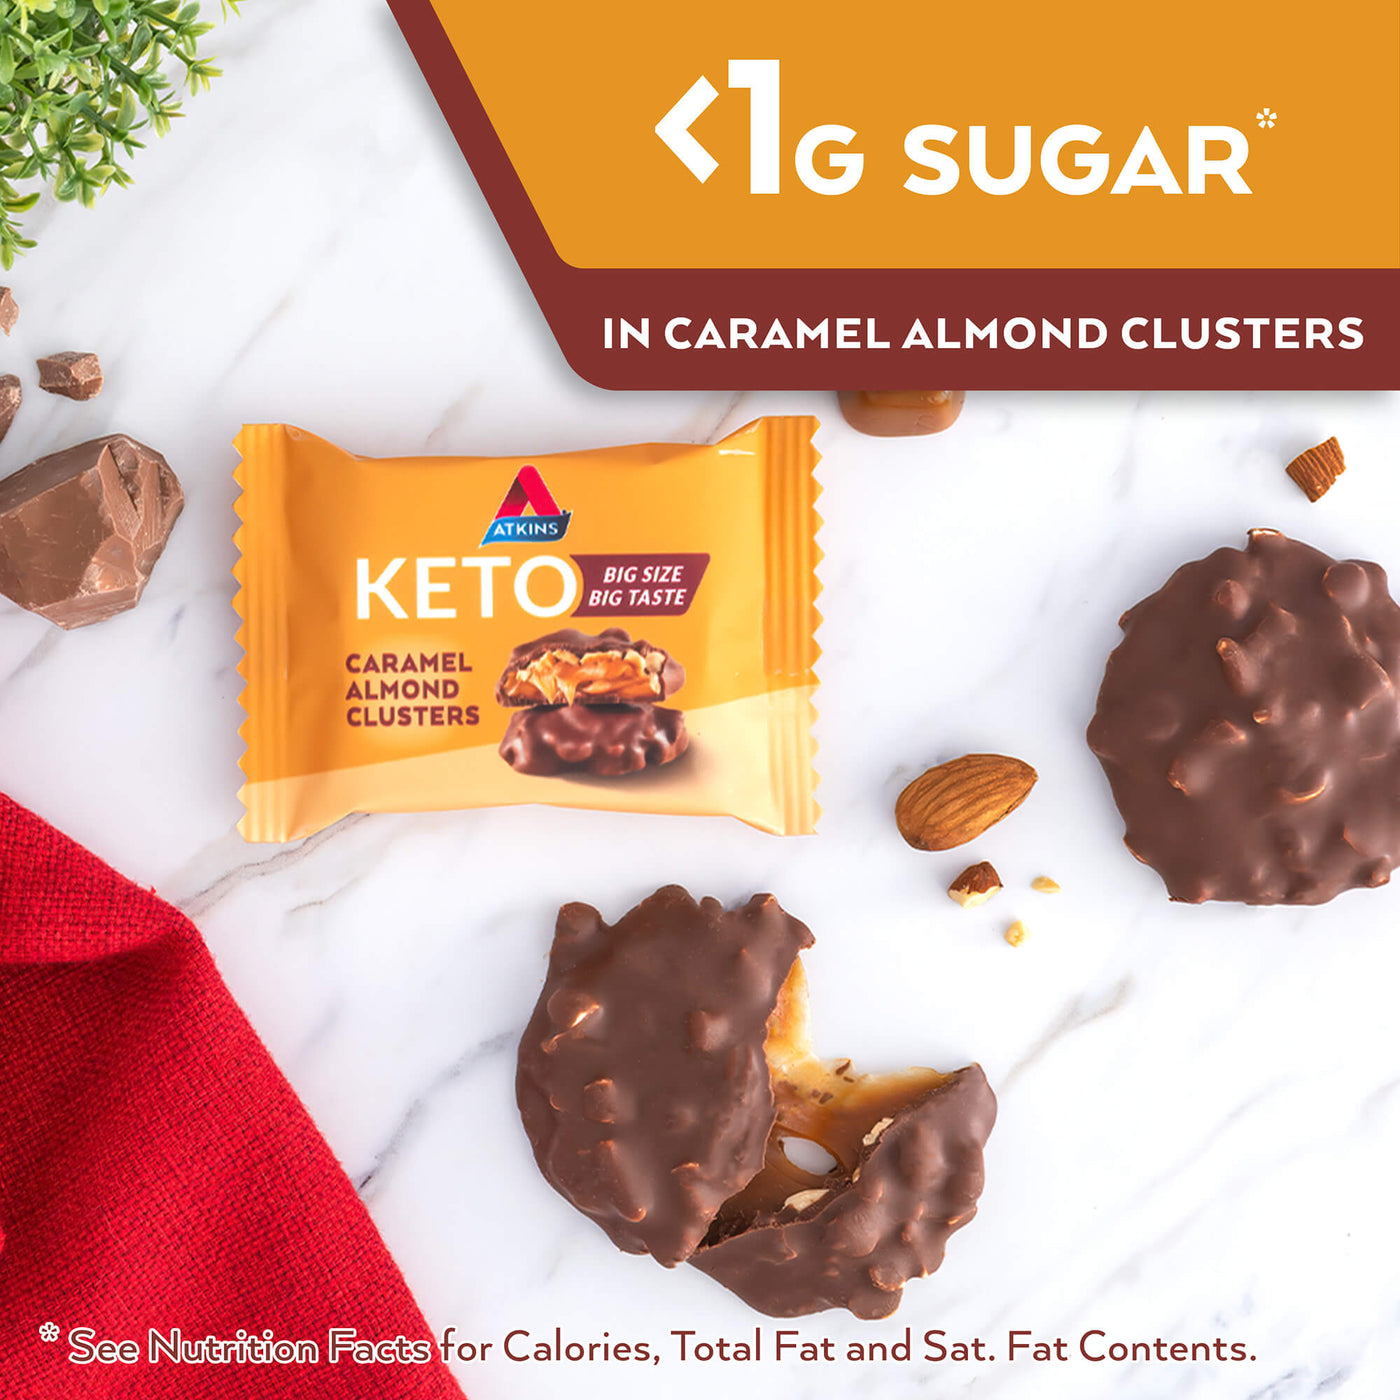 Caramel Almond Clusters. <1g sugar* in caramel almond clusters. *see Nutrition Facts for calories, Total fat and Sat. Fat contents.